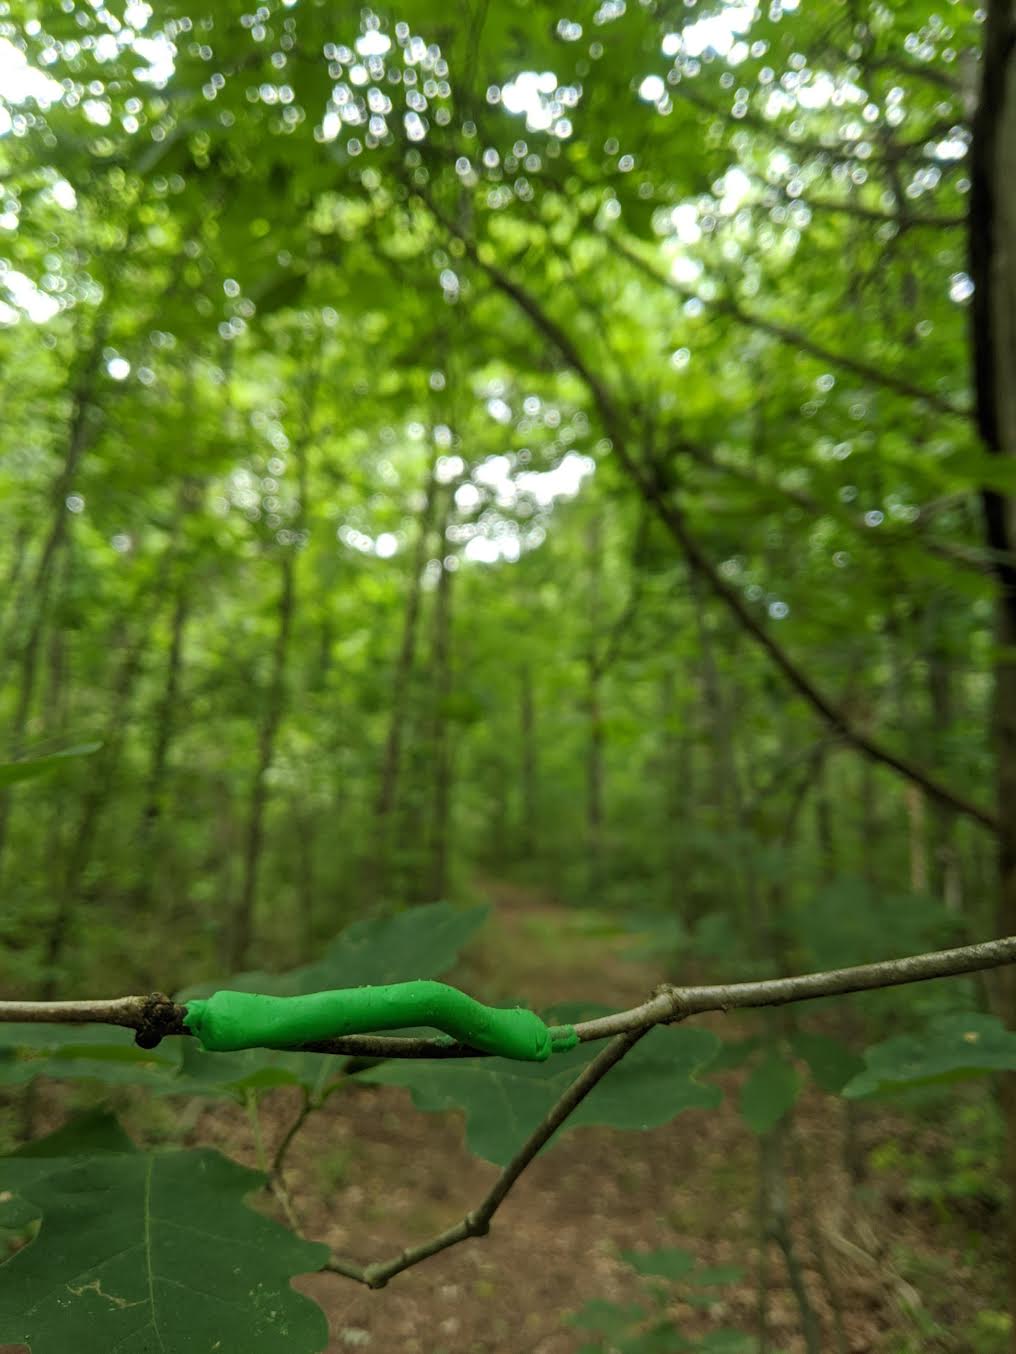 Clay "caterpillar" on a branch